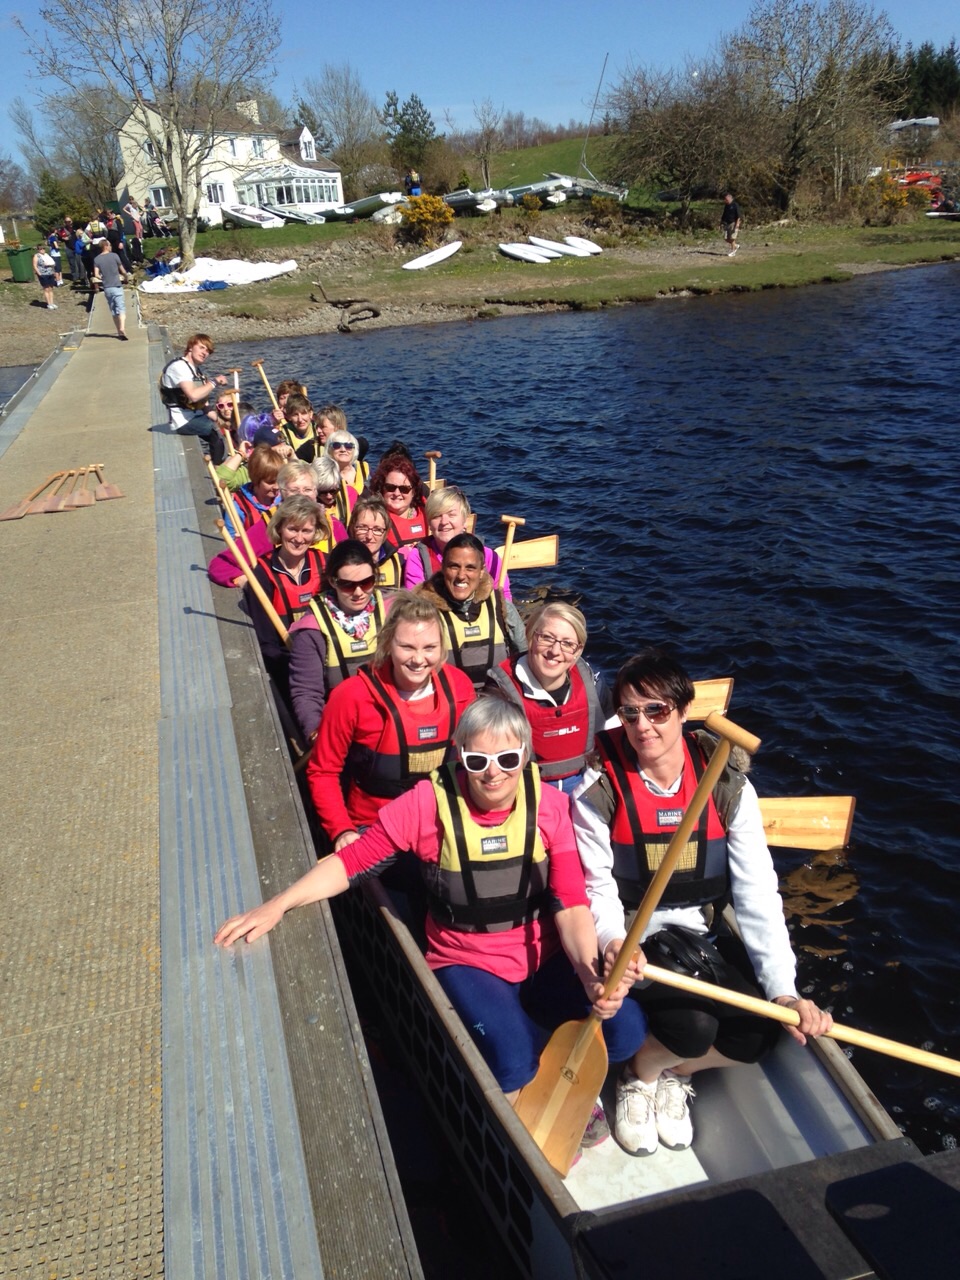 The team in a big boat. They are holding paddles